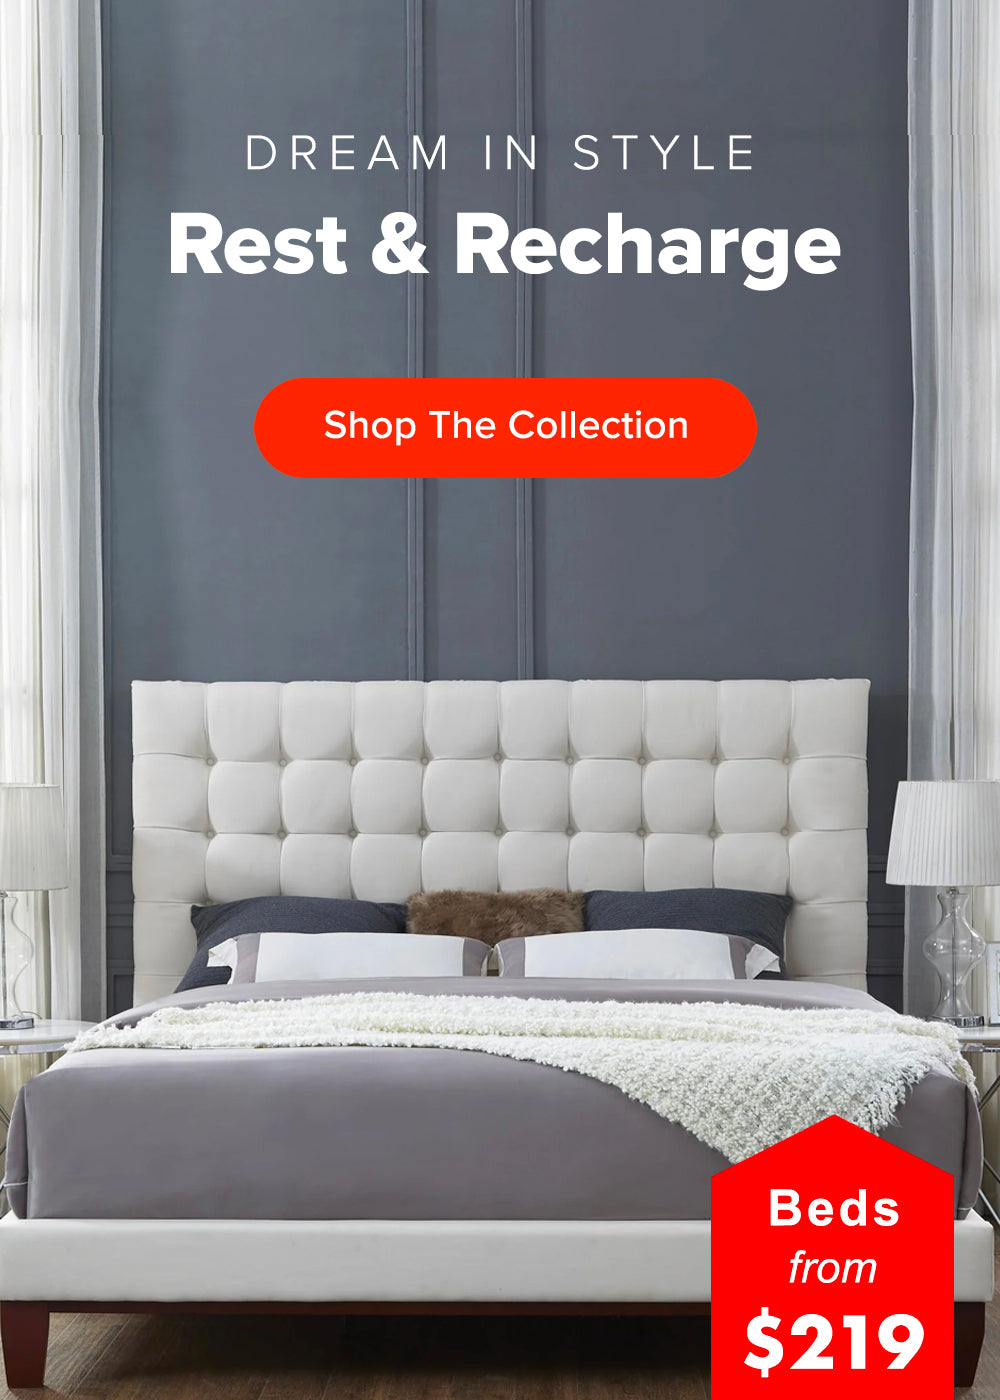 Dream in Style - Rest & Recharge - Bedroom Furniture